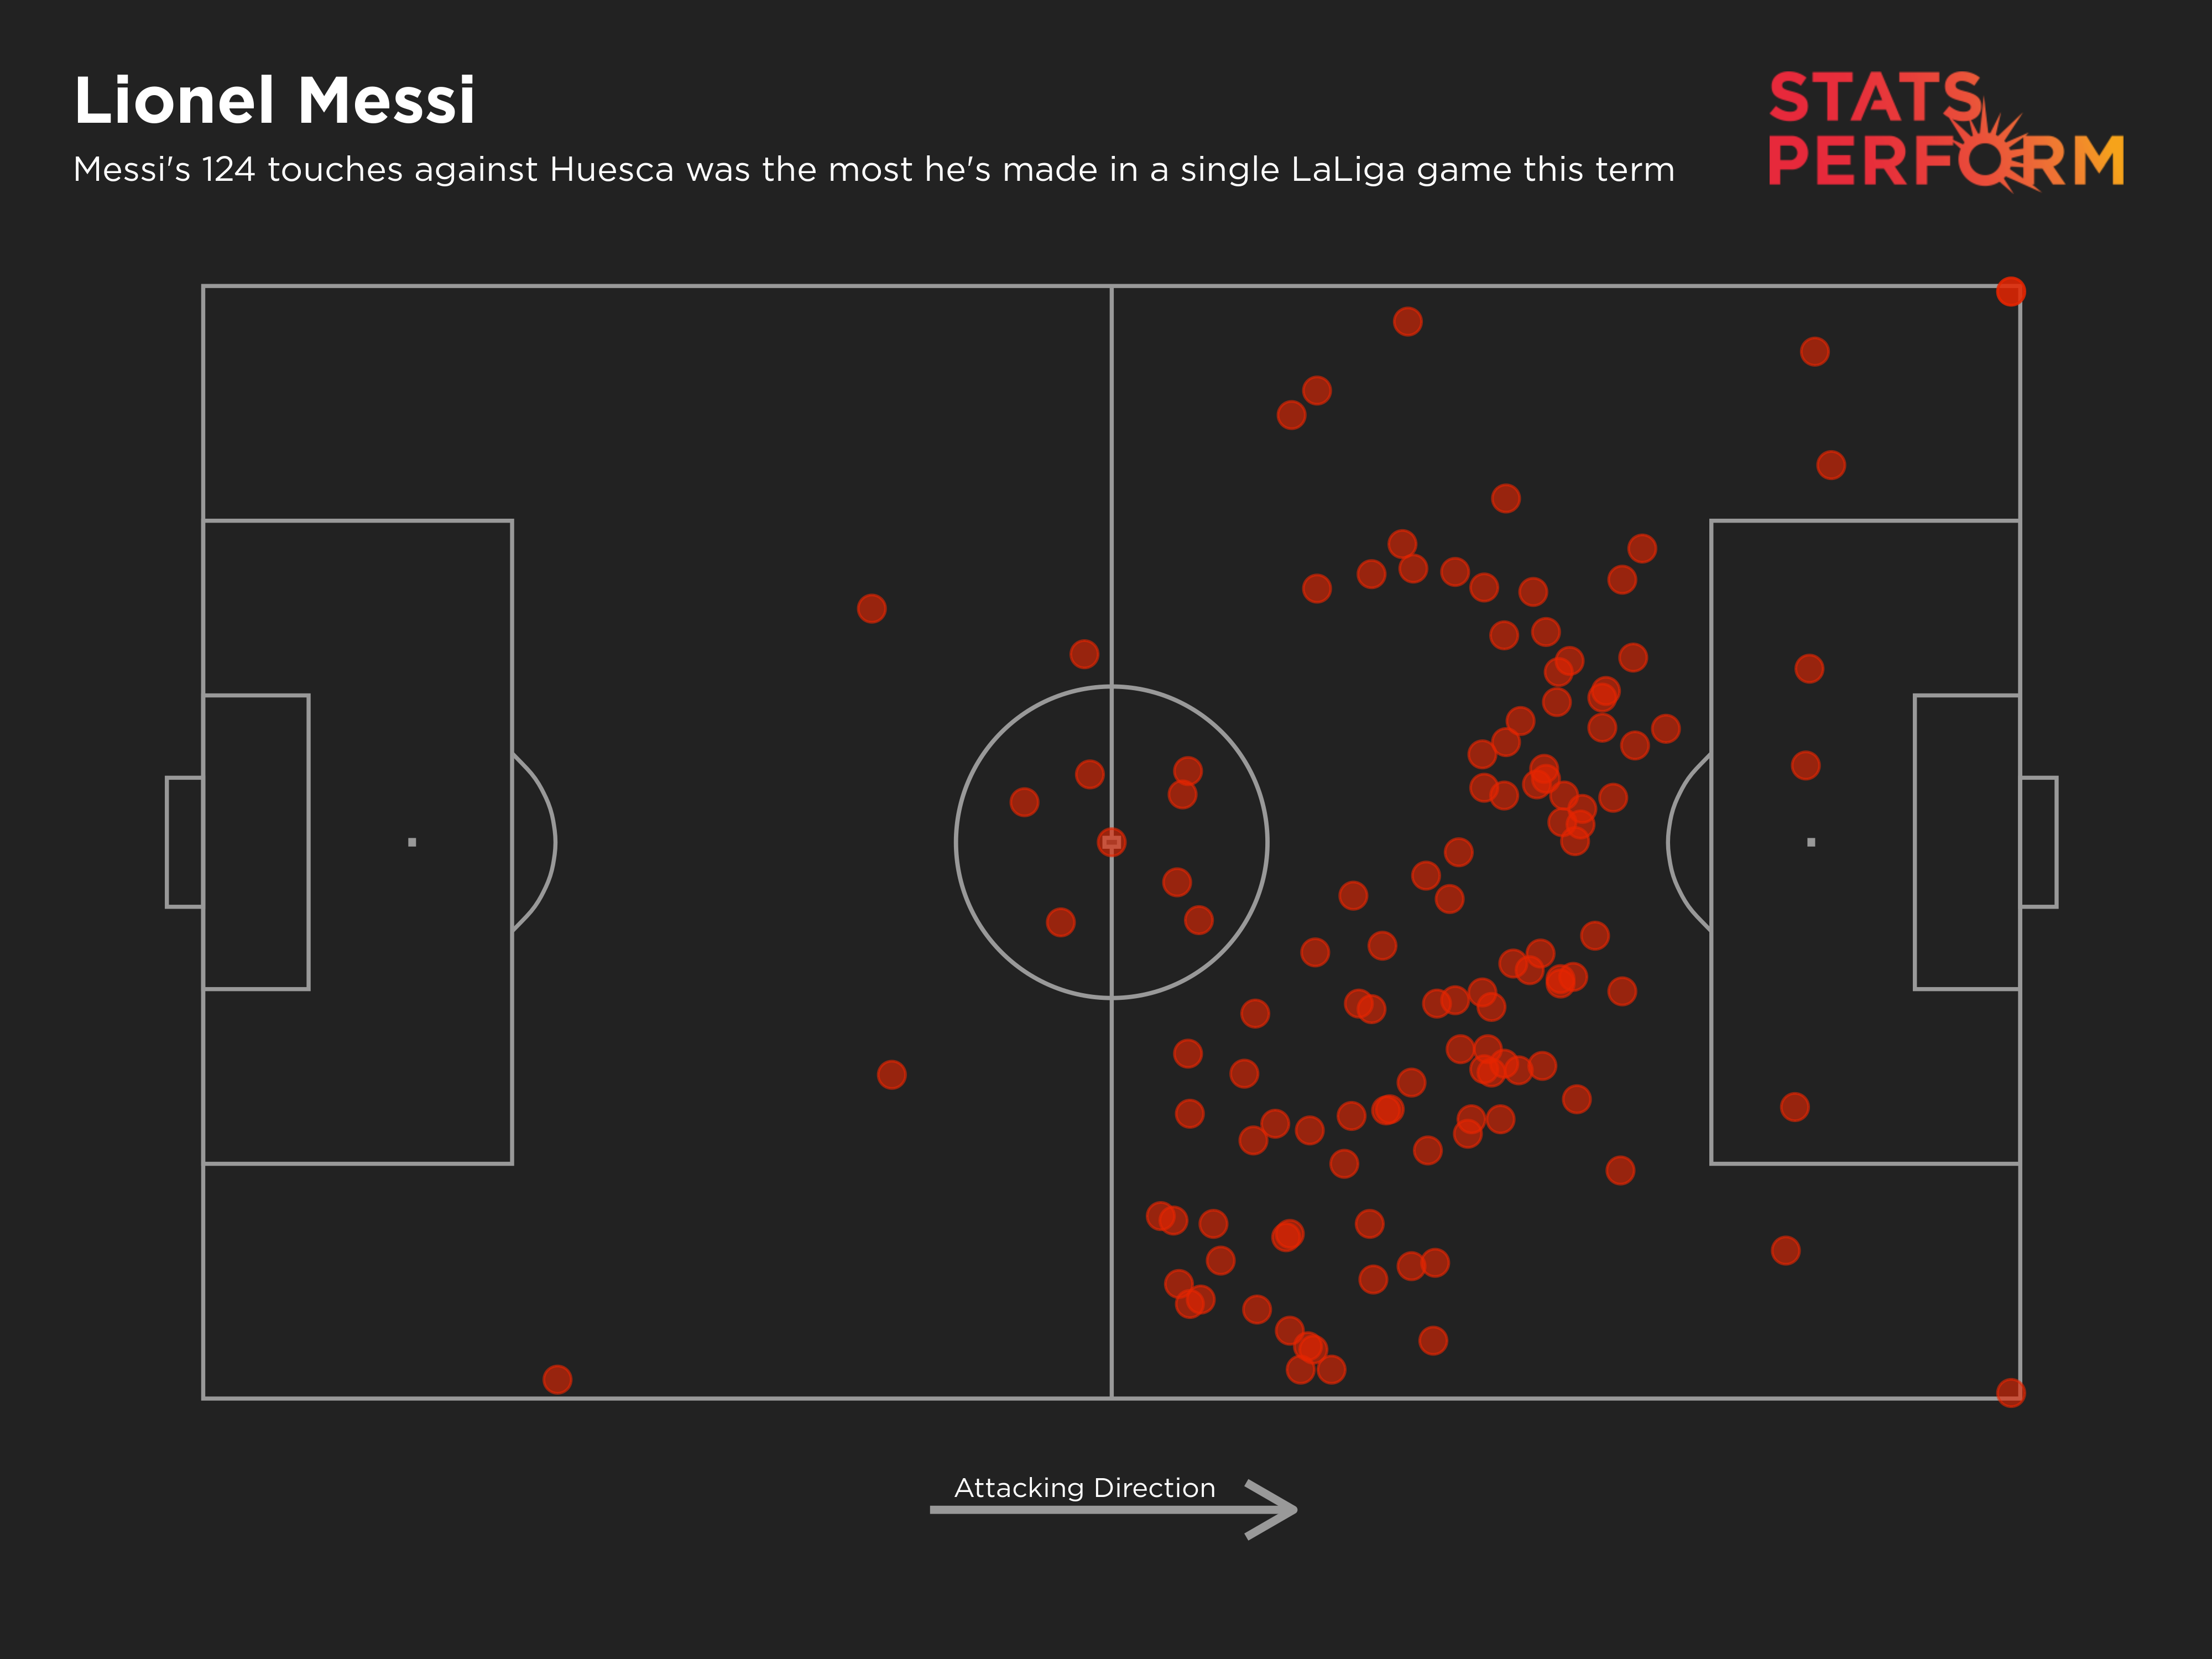 Messi's 124 touches against Huesca was the most he has made in a LaLiga game this term